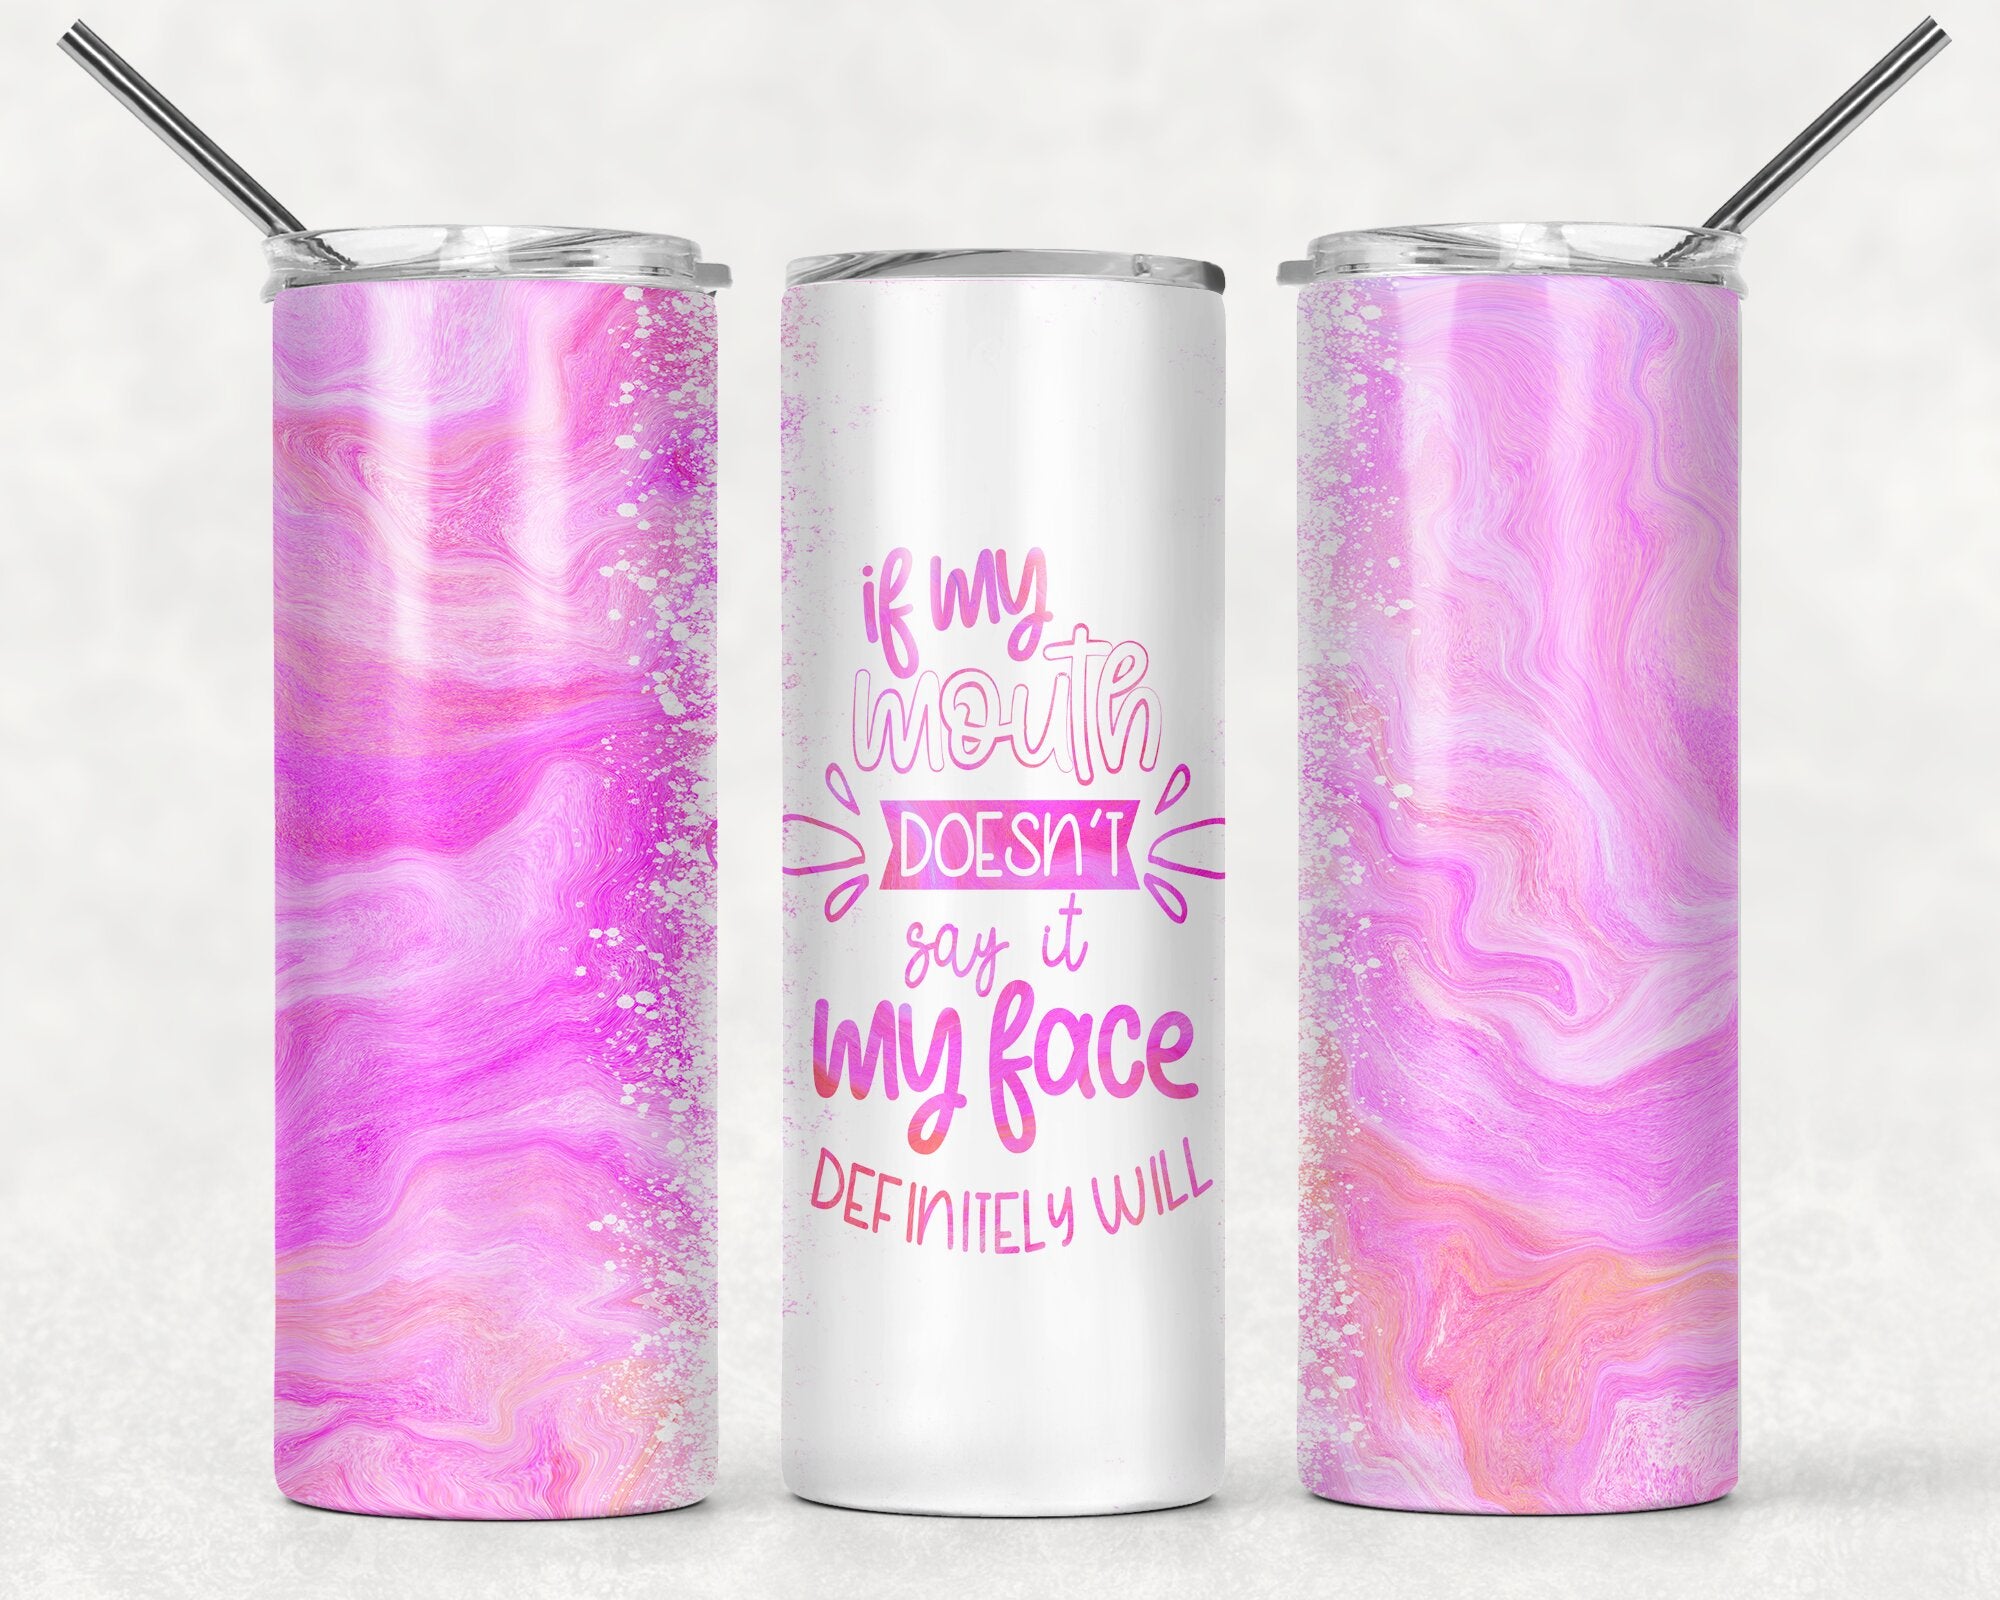 If My Mouth Doesn't Say It my Face Definitely Will - 20oz Skinny Tumbler